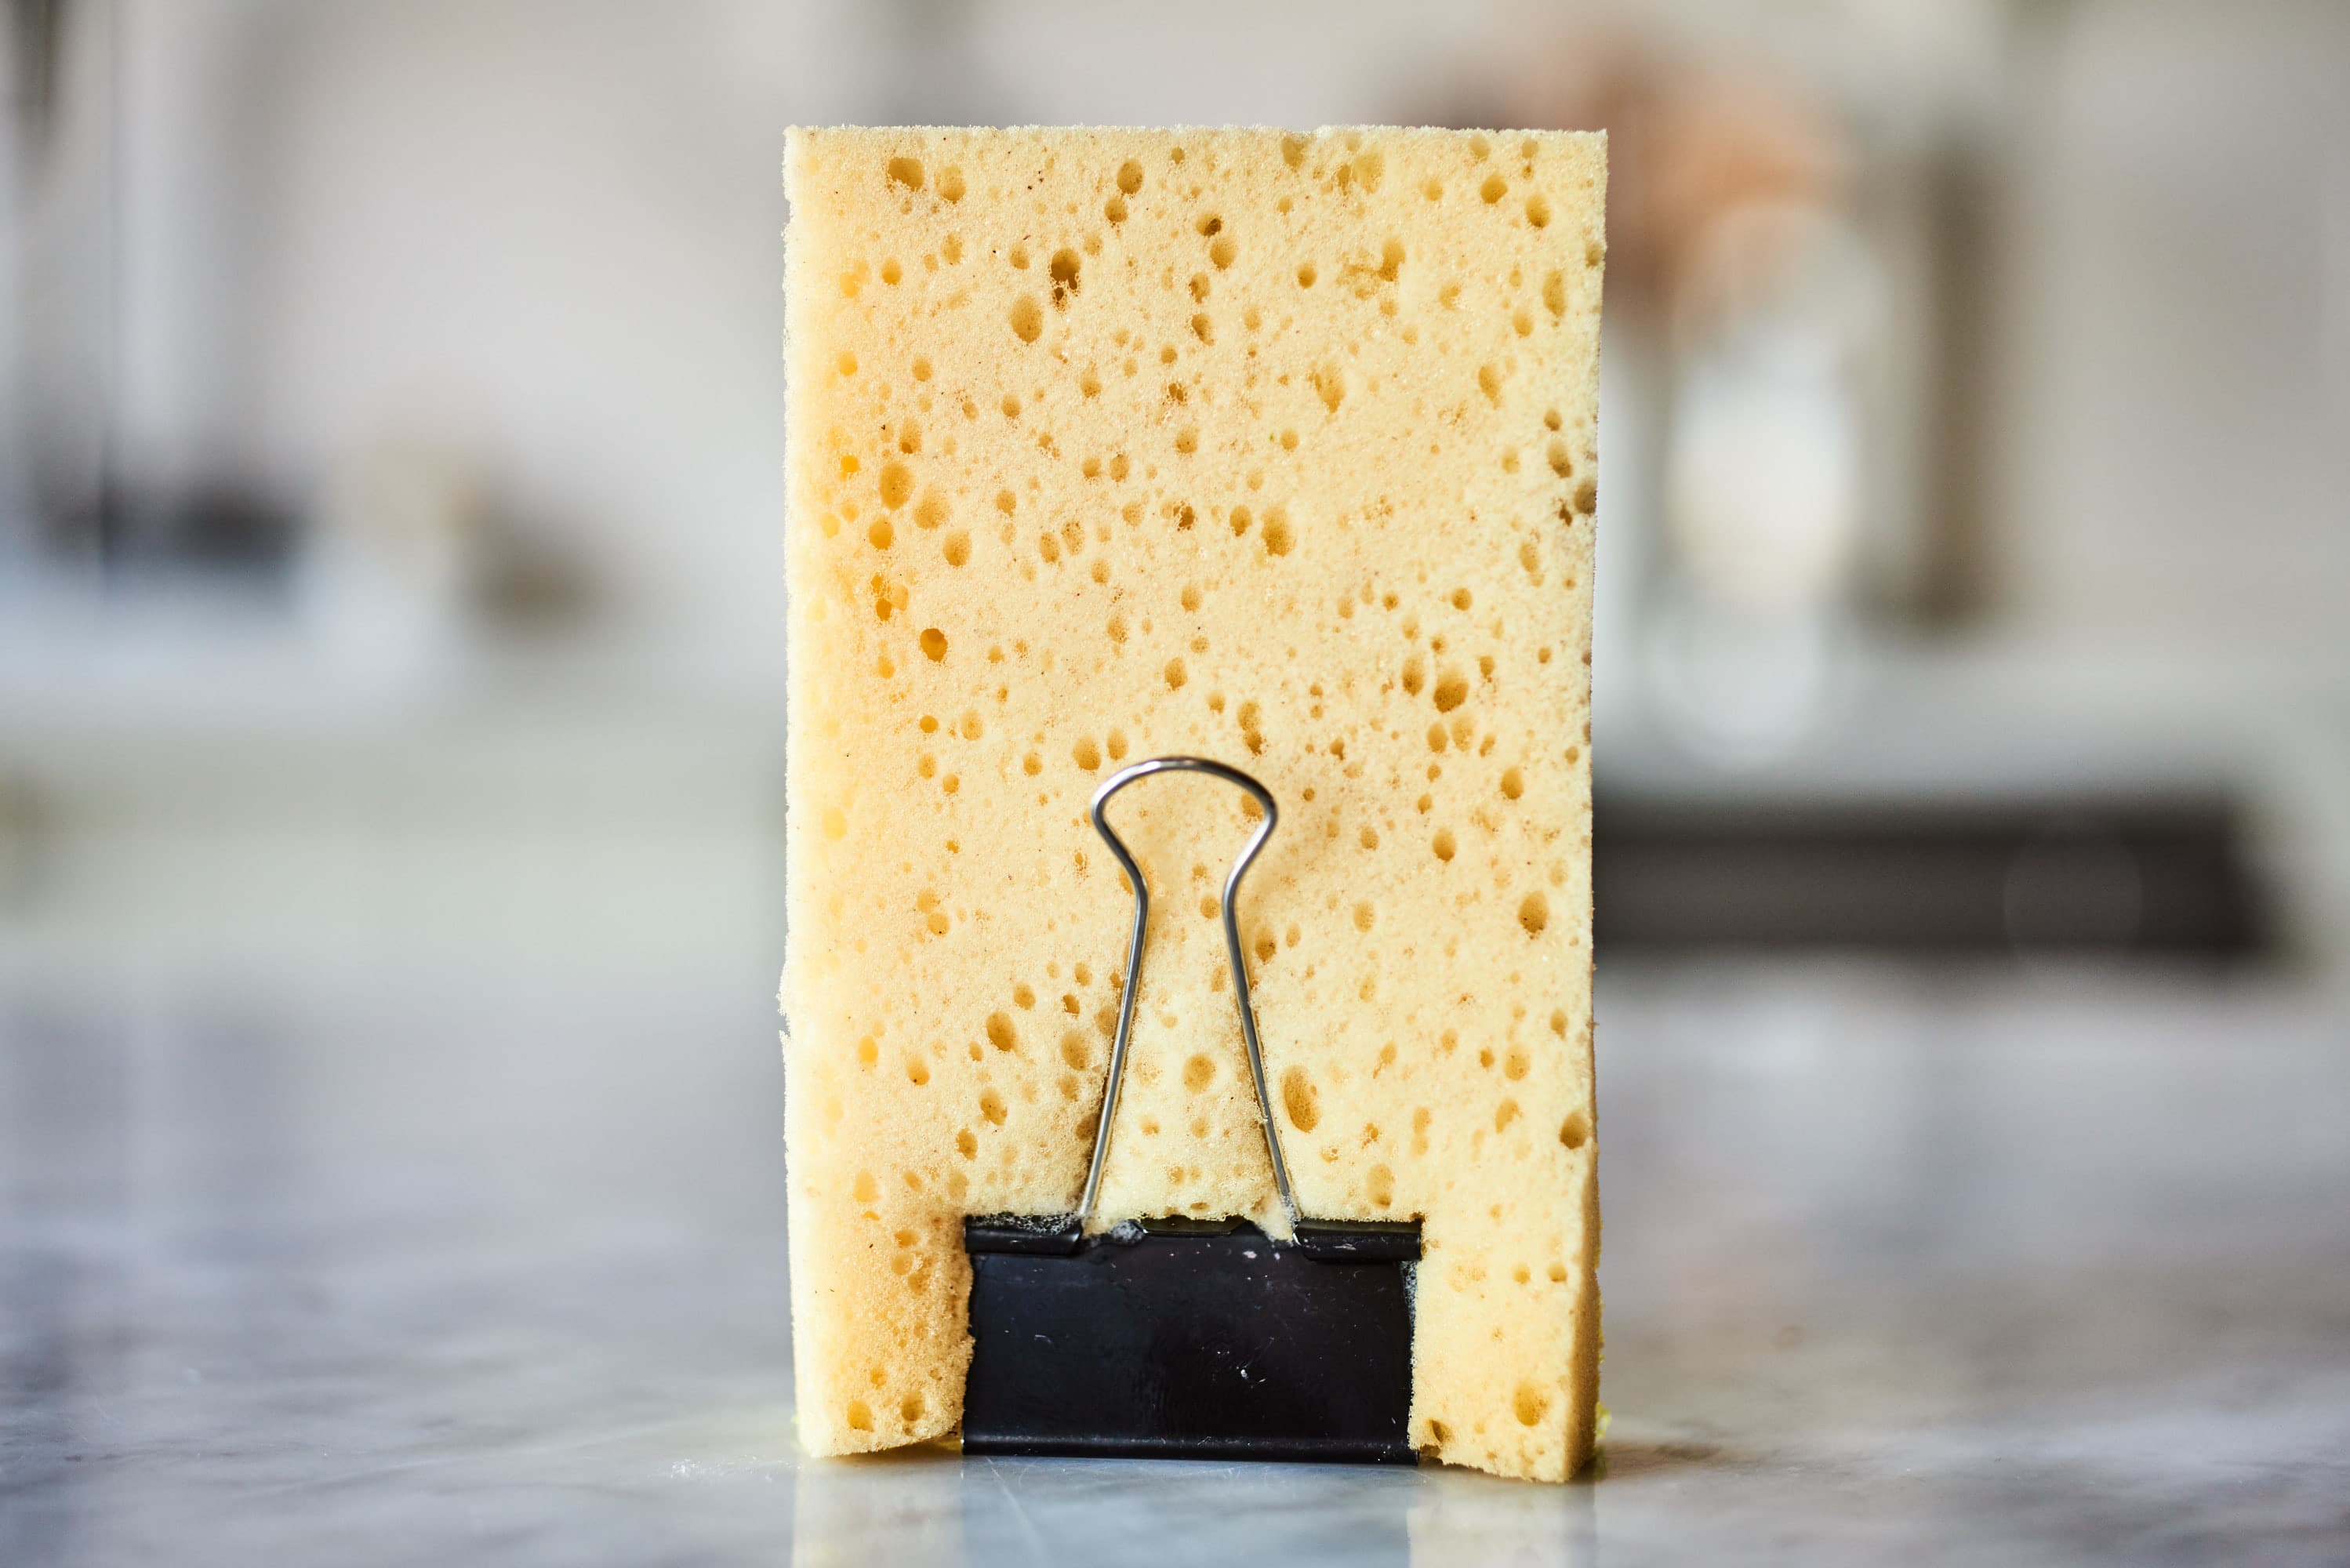 https://cdn.apartmenttherapy.info/image/upload/v1575304247/k/Photo/Lifestyle/2019-12-The-Free-Easy-Way-To-Make-Your-Sponge-Less-Gross/2019-11-25_Kitchn_94734_Lifestyle-The-Free-Easy-Way-To-Make-Your-Sponge-Less-Gross.jpg